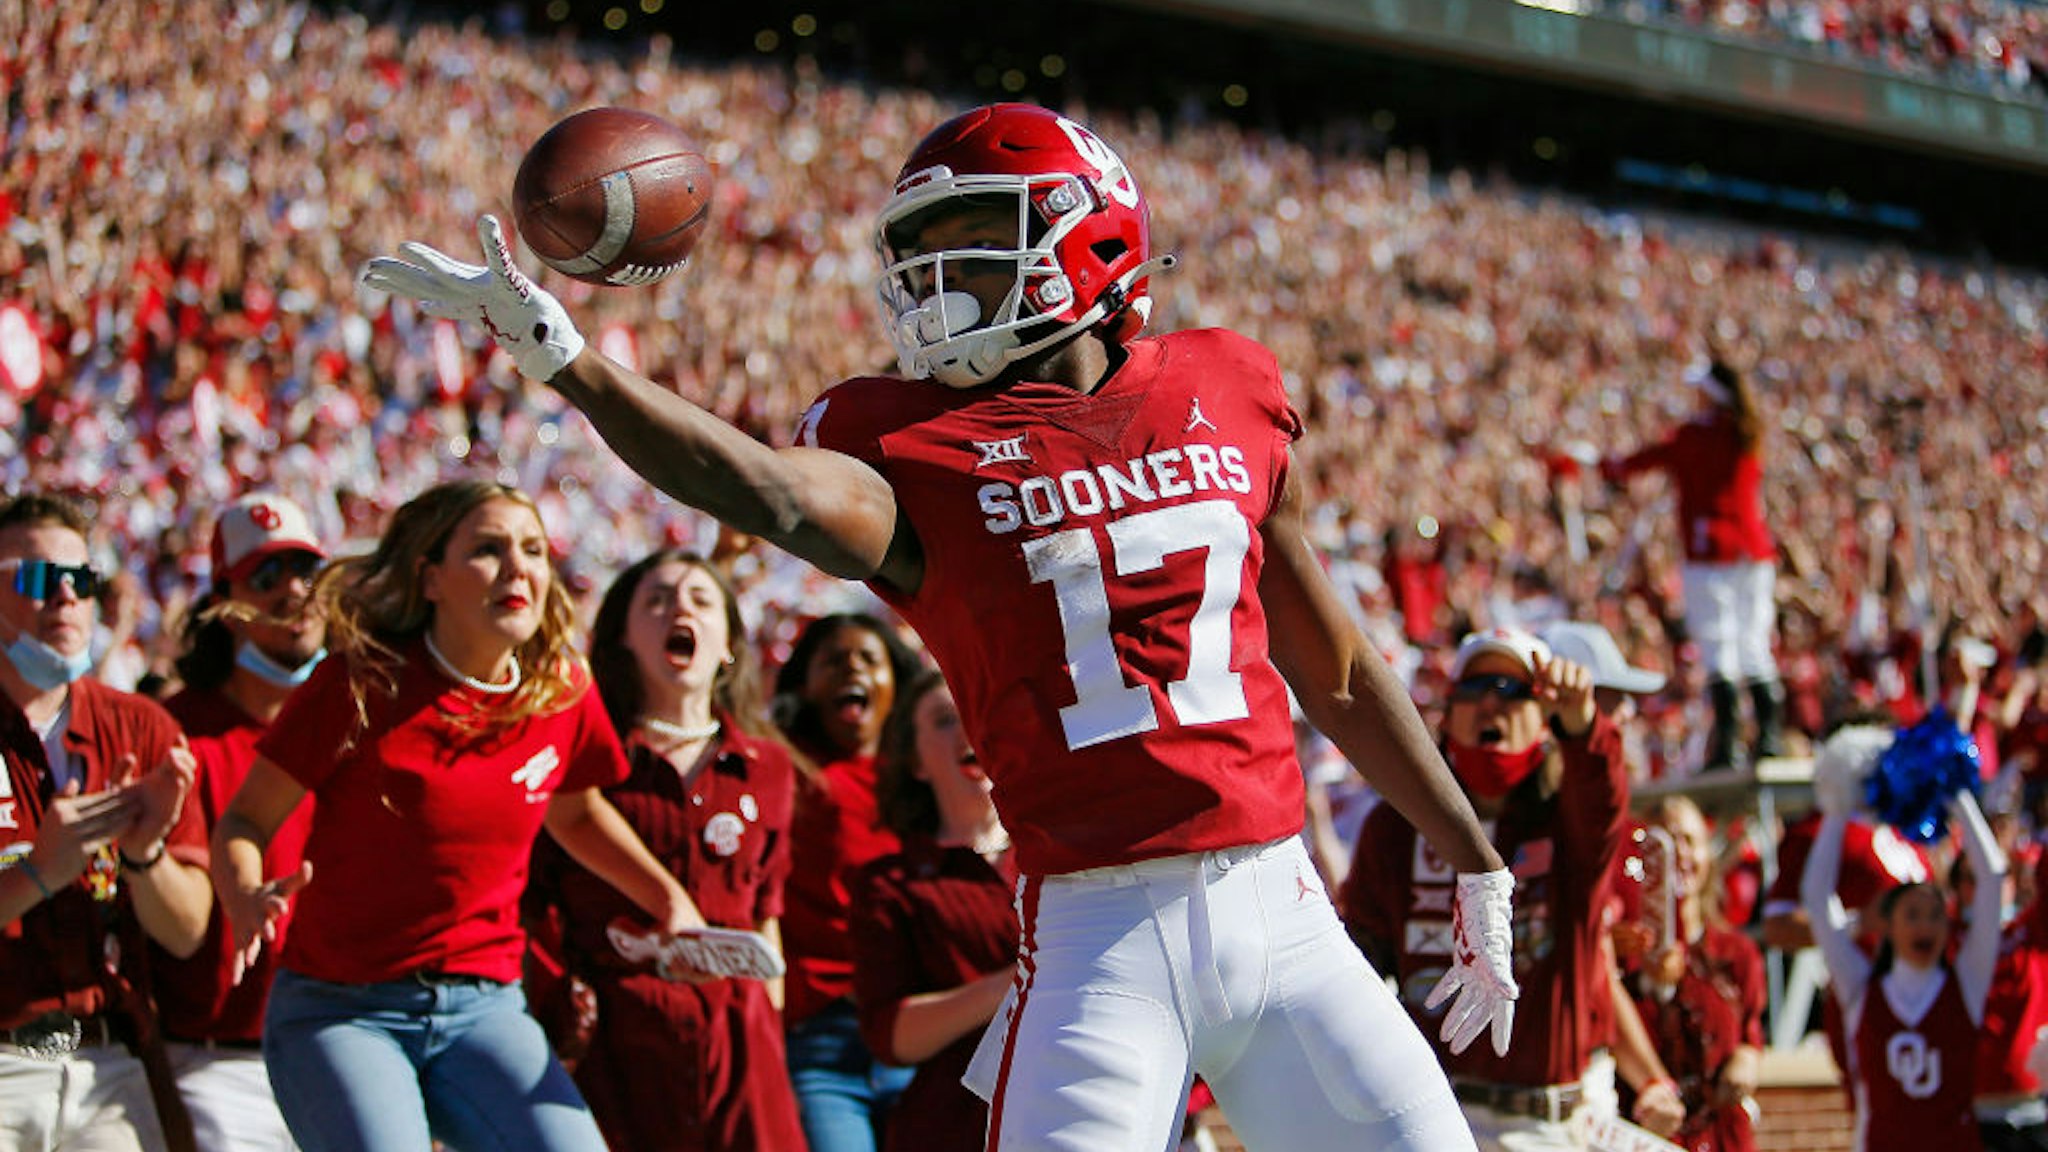 NORMAN, OK - OCTOBER 30: Wide receiver Marvin Mims #17 of the Oklahoma Sooners pops and rolls the ball off his fingertips after scoring on a 67-yard catch and run for a touchdown against the Texas Tech Red Raiders in the first quarter at Gaylord Family Oklahoma Memorial Stadium on October 30, 2021 in Norman, Oklahoma. Oklahoma won 52-21. (Photo by Brian Bahr/Getty Images)